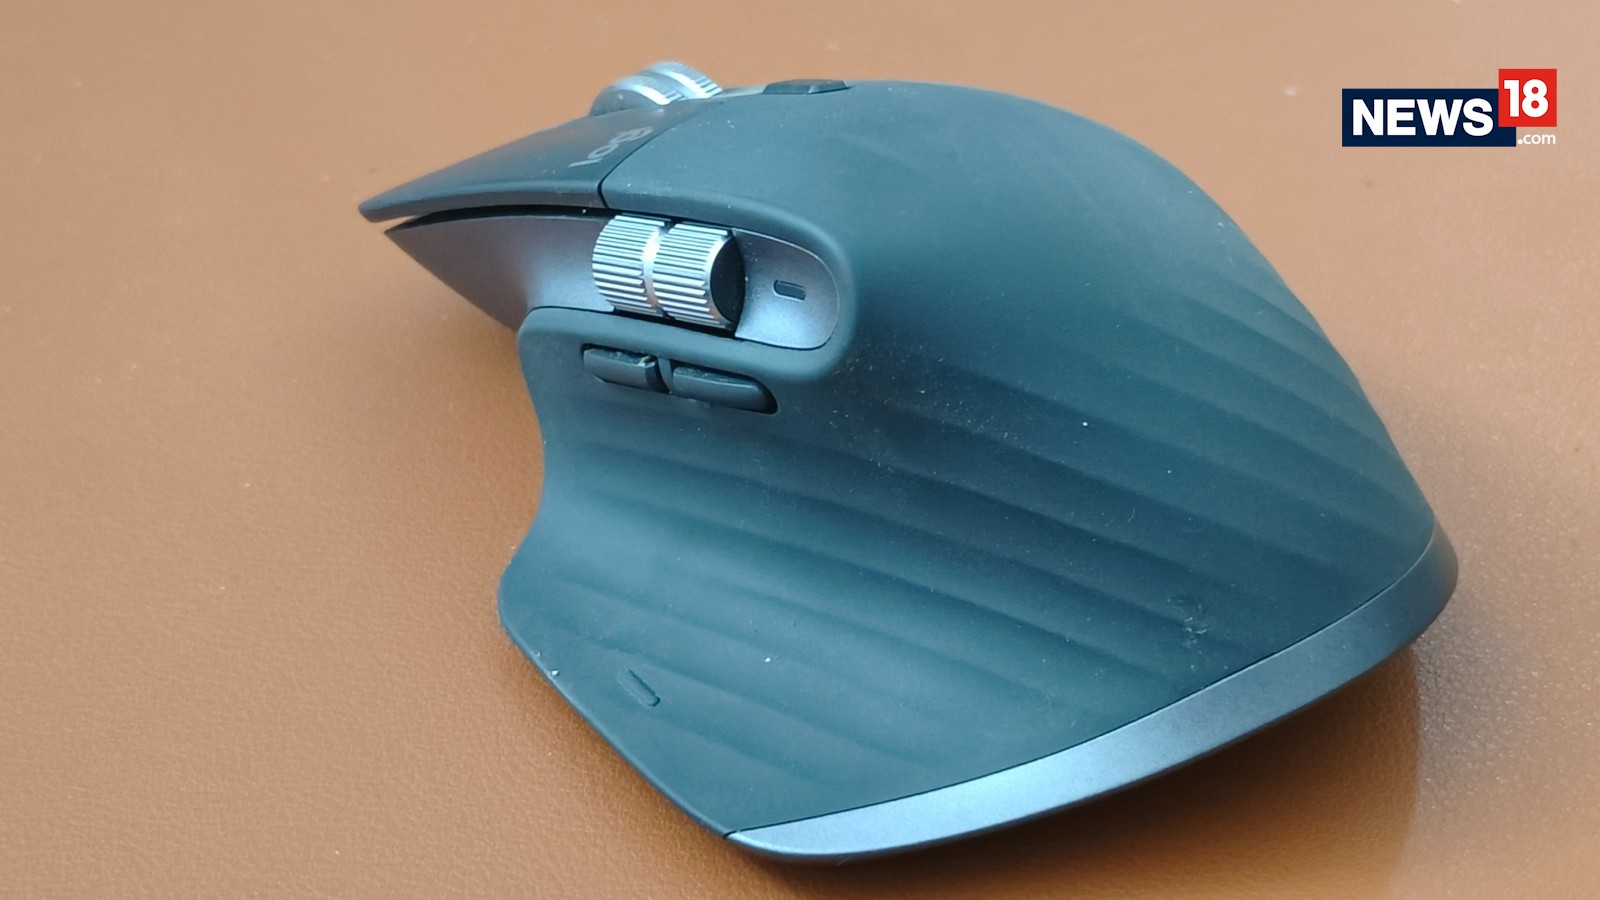 Logitech MX Master 3S - Review: Premium Mechanical News18 MX At A And Keyboard Mouse Comfort